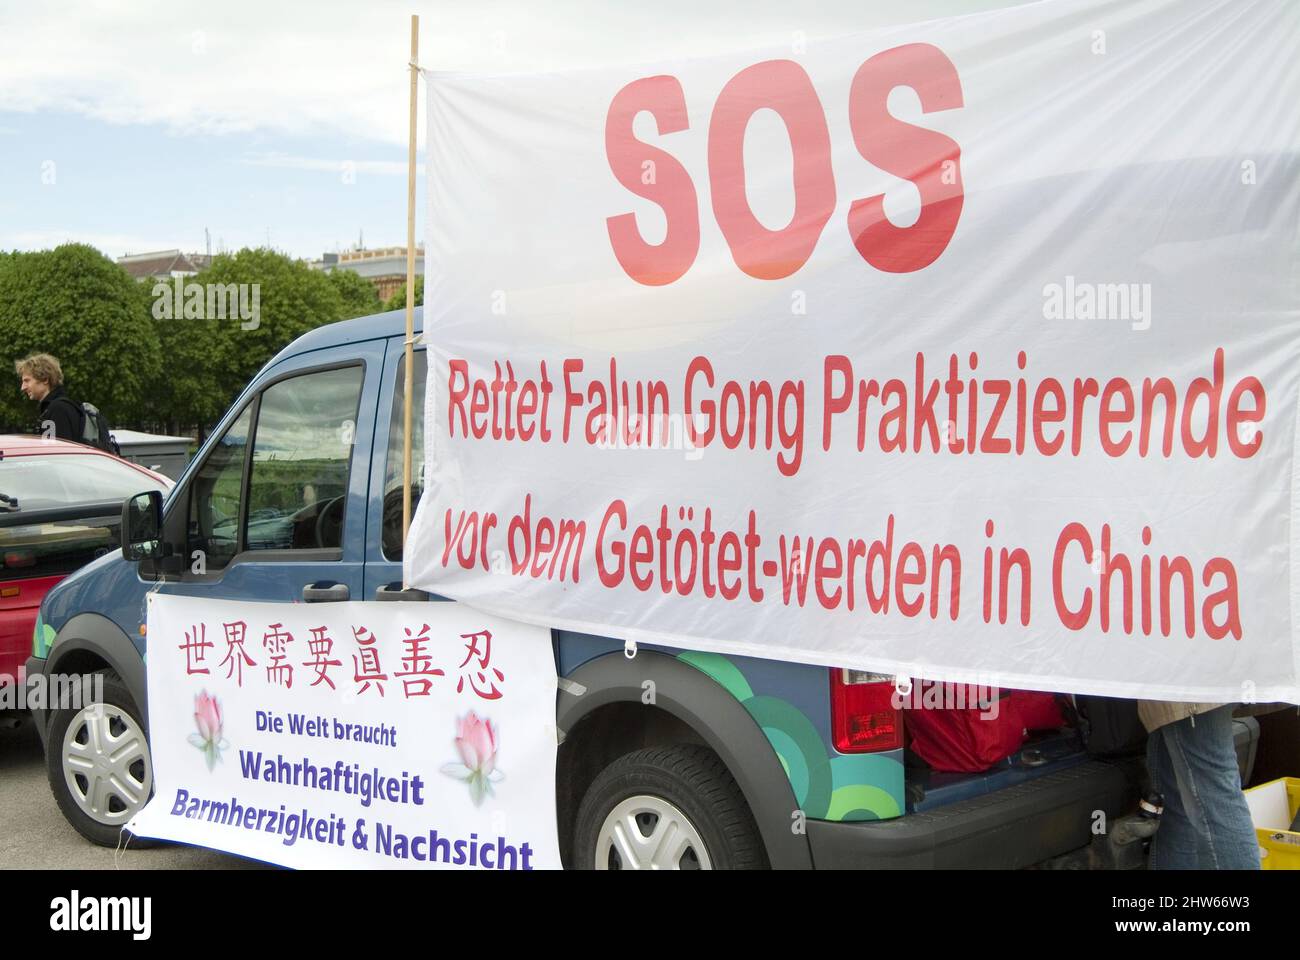 Vienna, Austria. July 12, 2006. Falun Dafa demonstration in Vienna. Inscription 'Save Falun Gong practitioners from being killed in China'. Stock Photo